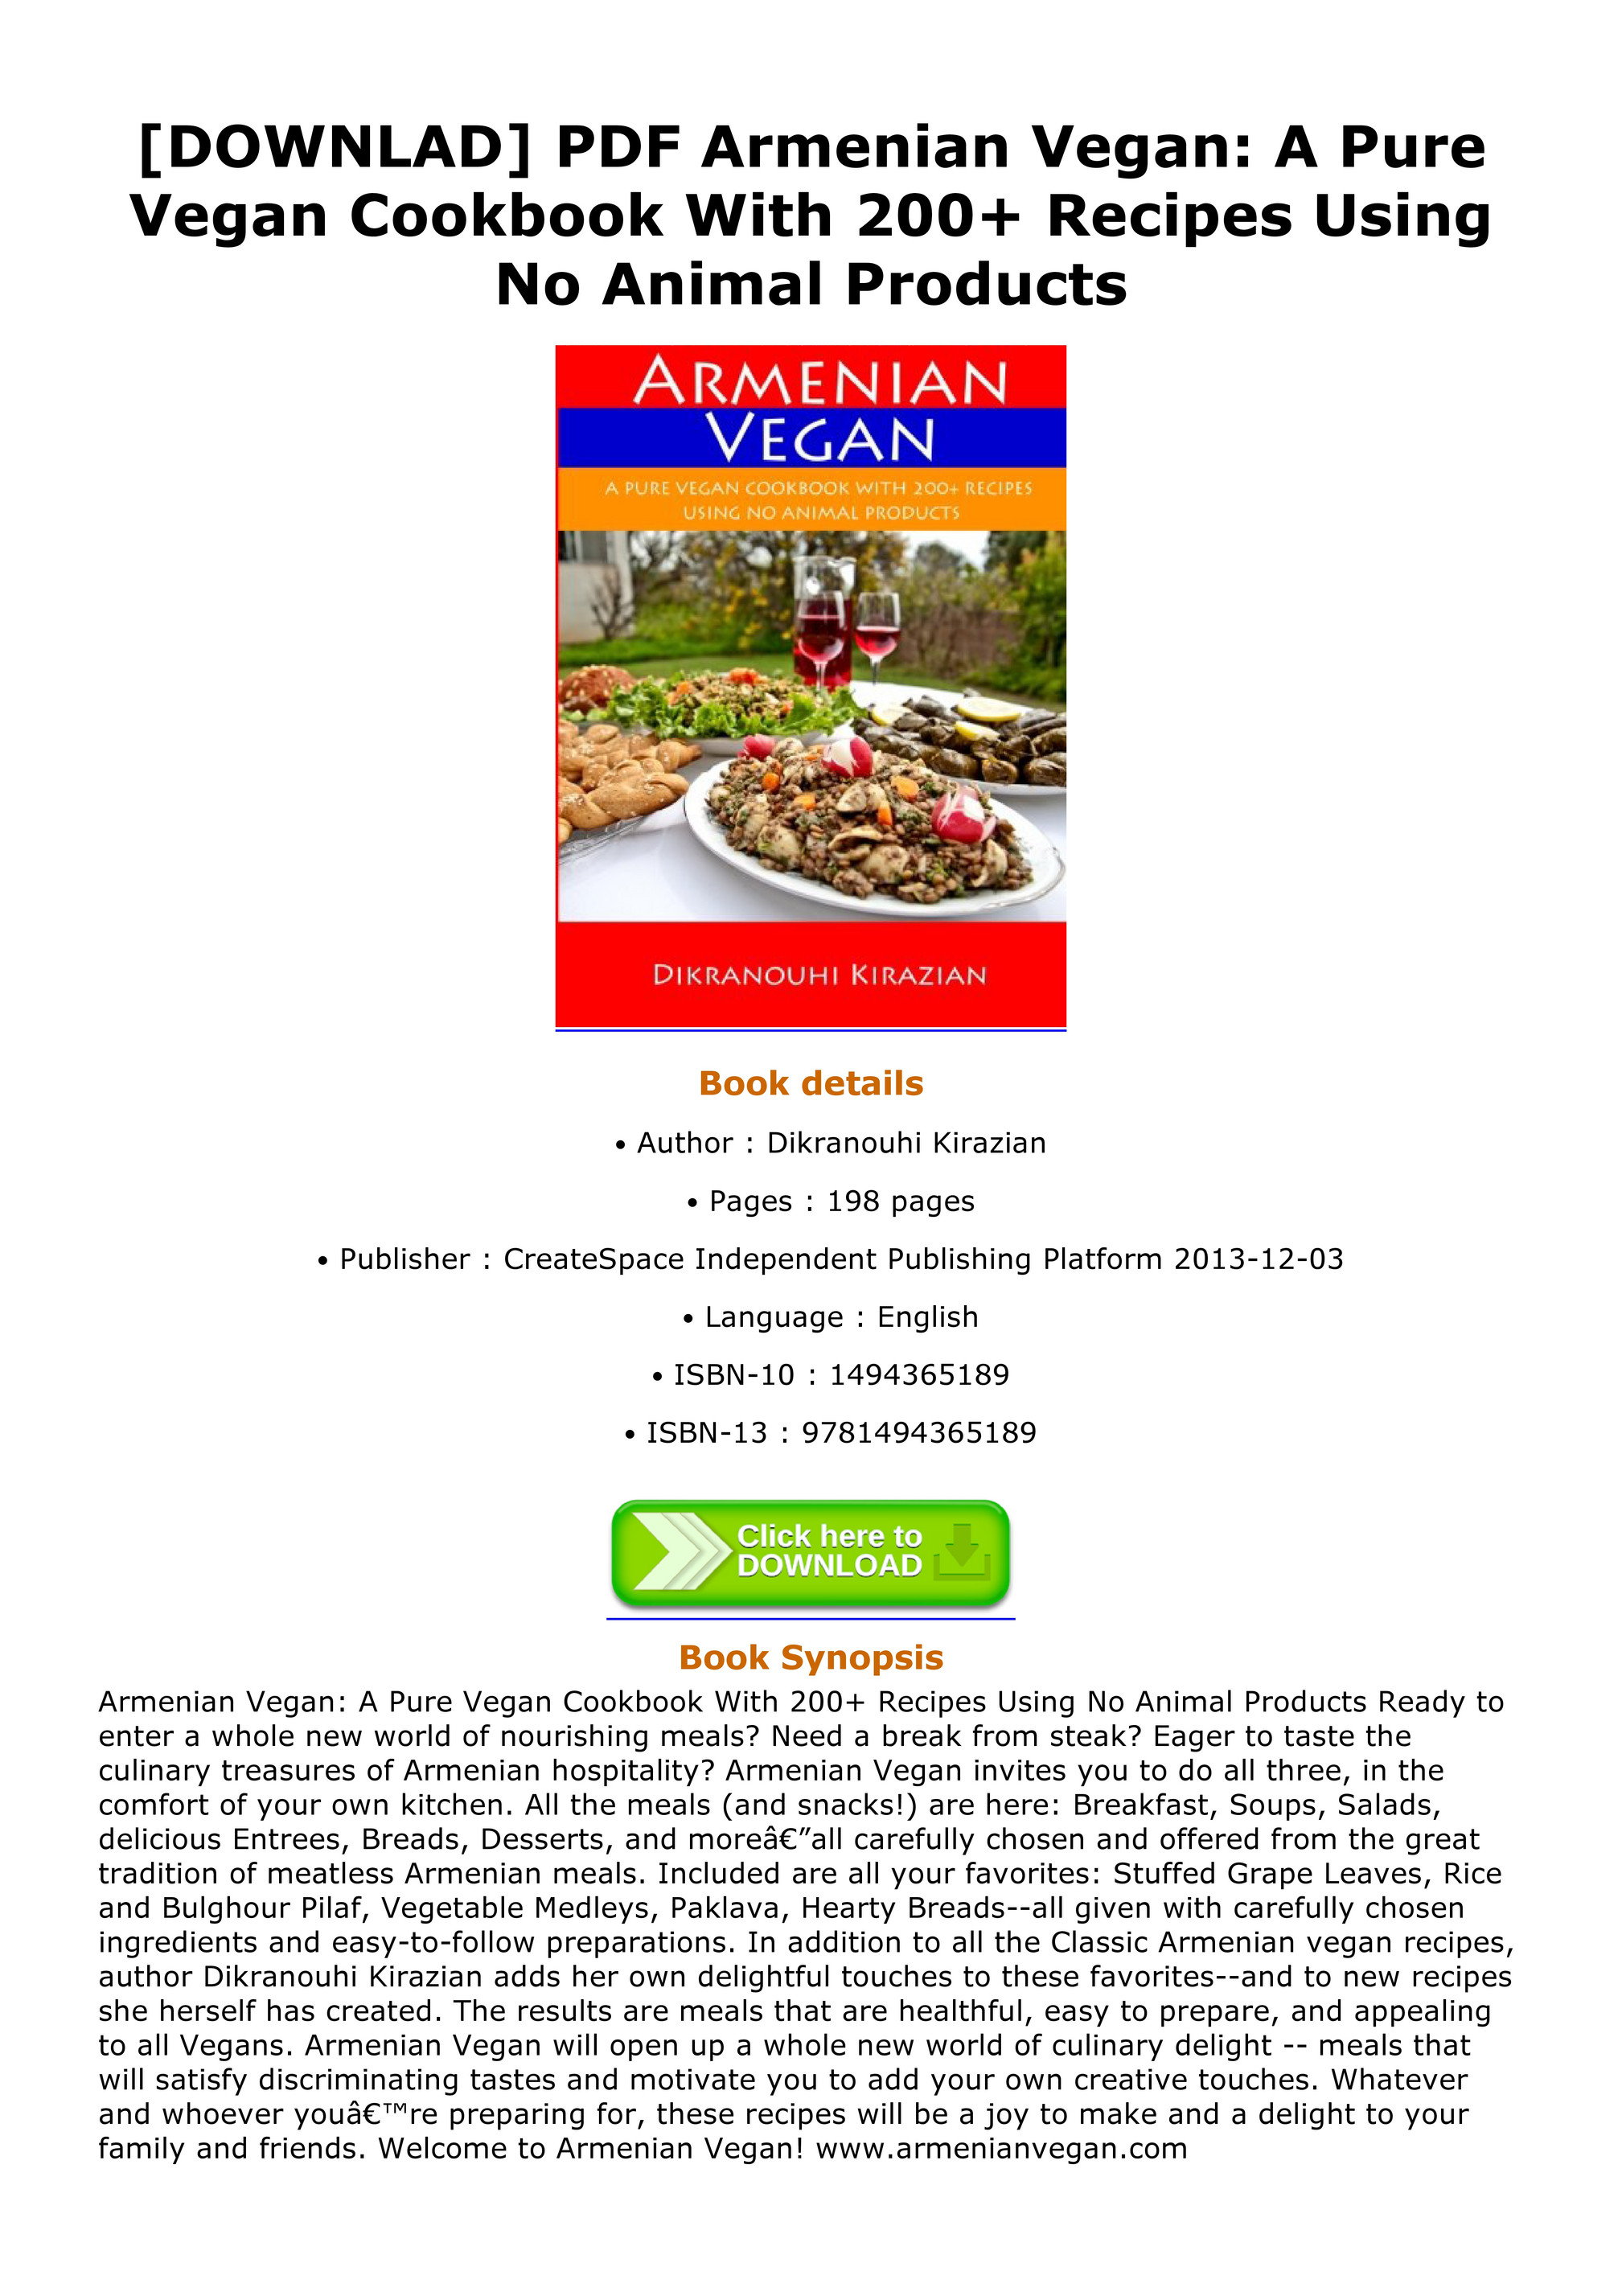 Maloney - DOWNLAD PDF Armenian Vegan A Pure Vegan Cookbook With 200 Recipes  Using No Animal Products - Page 1 - Created with 